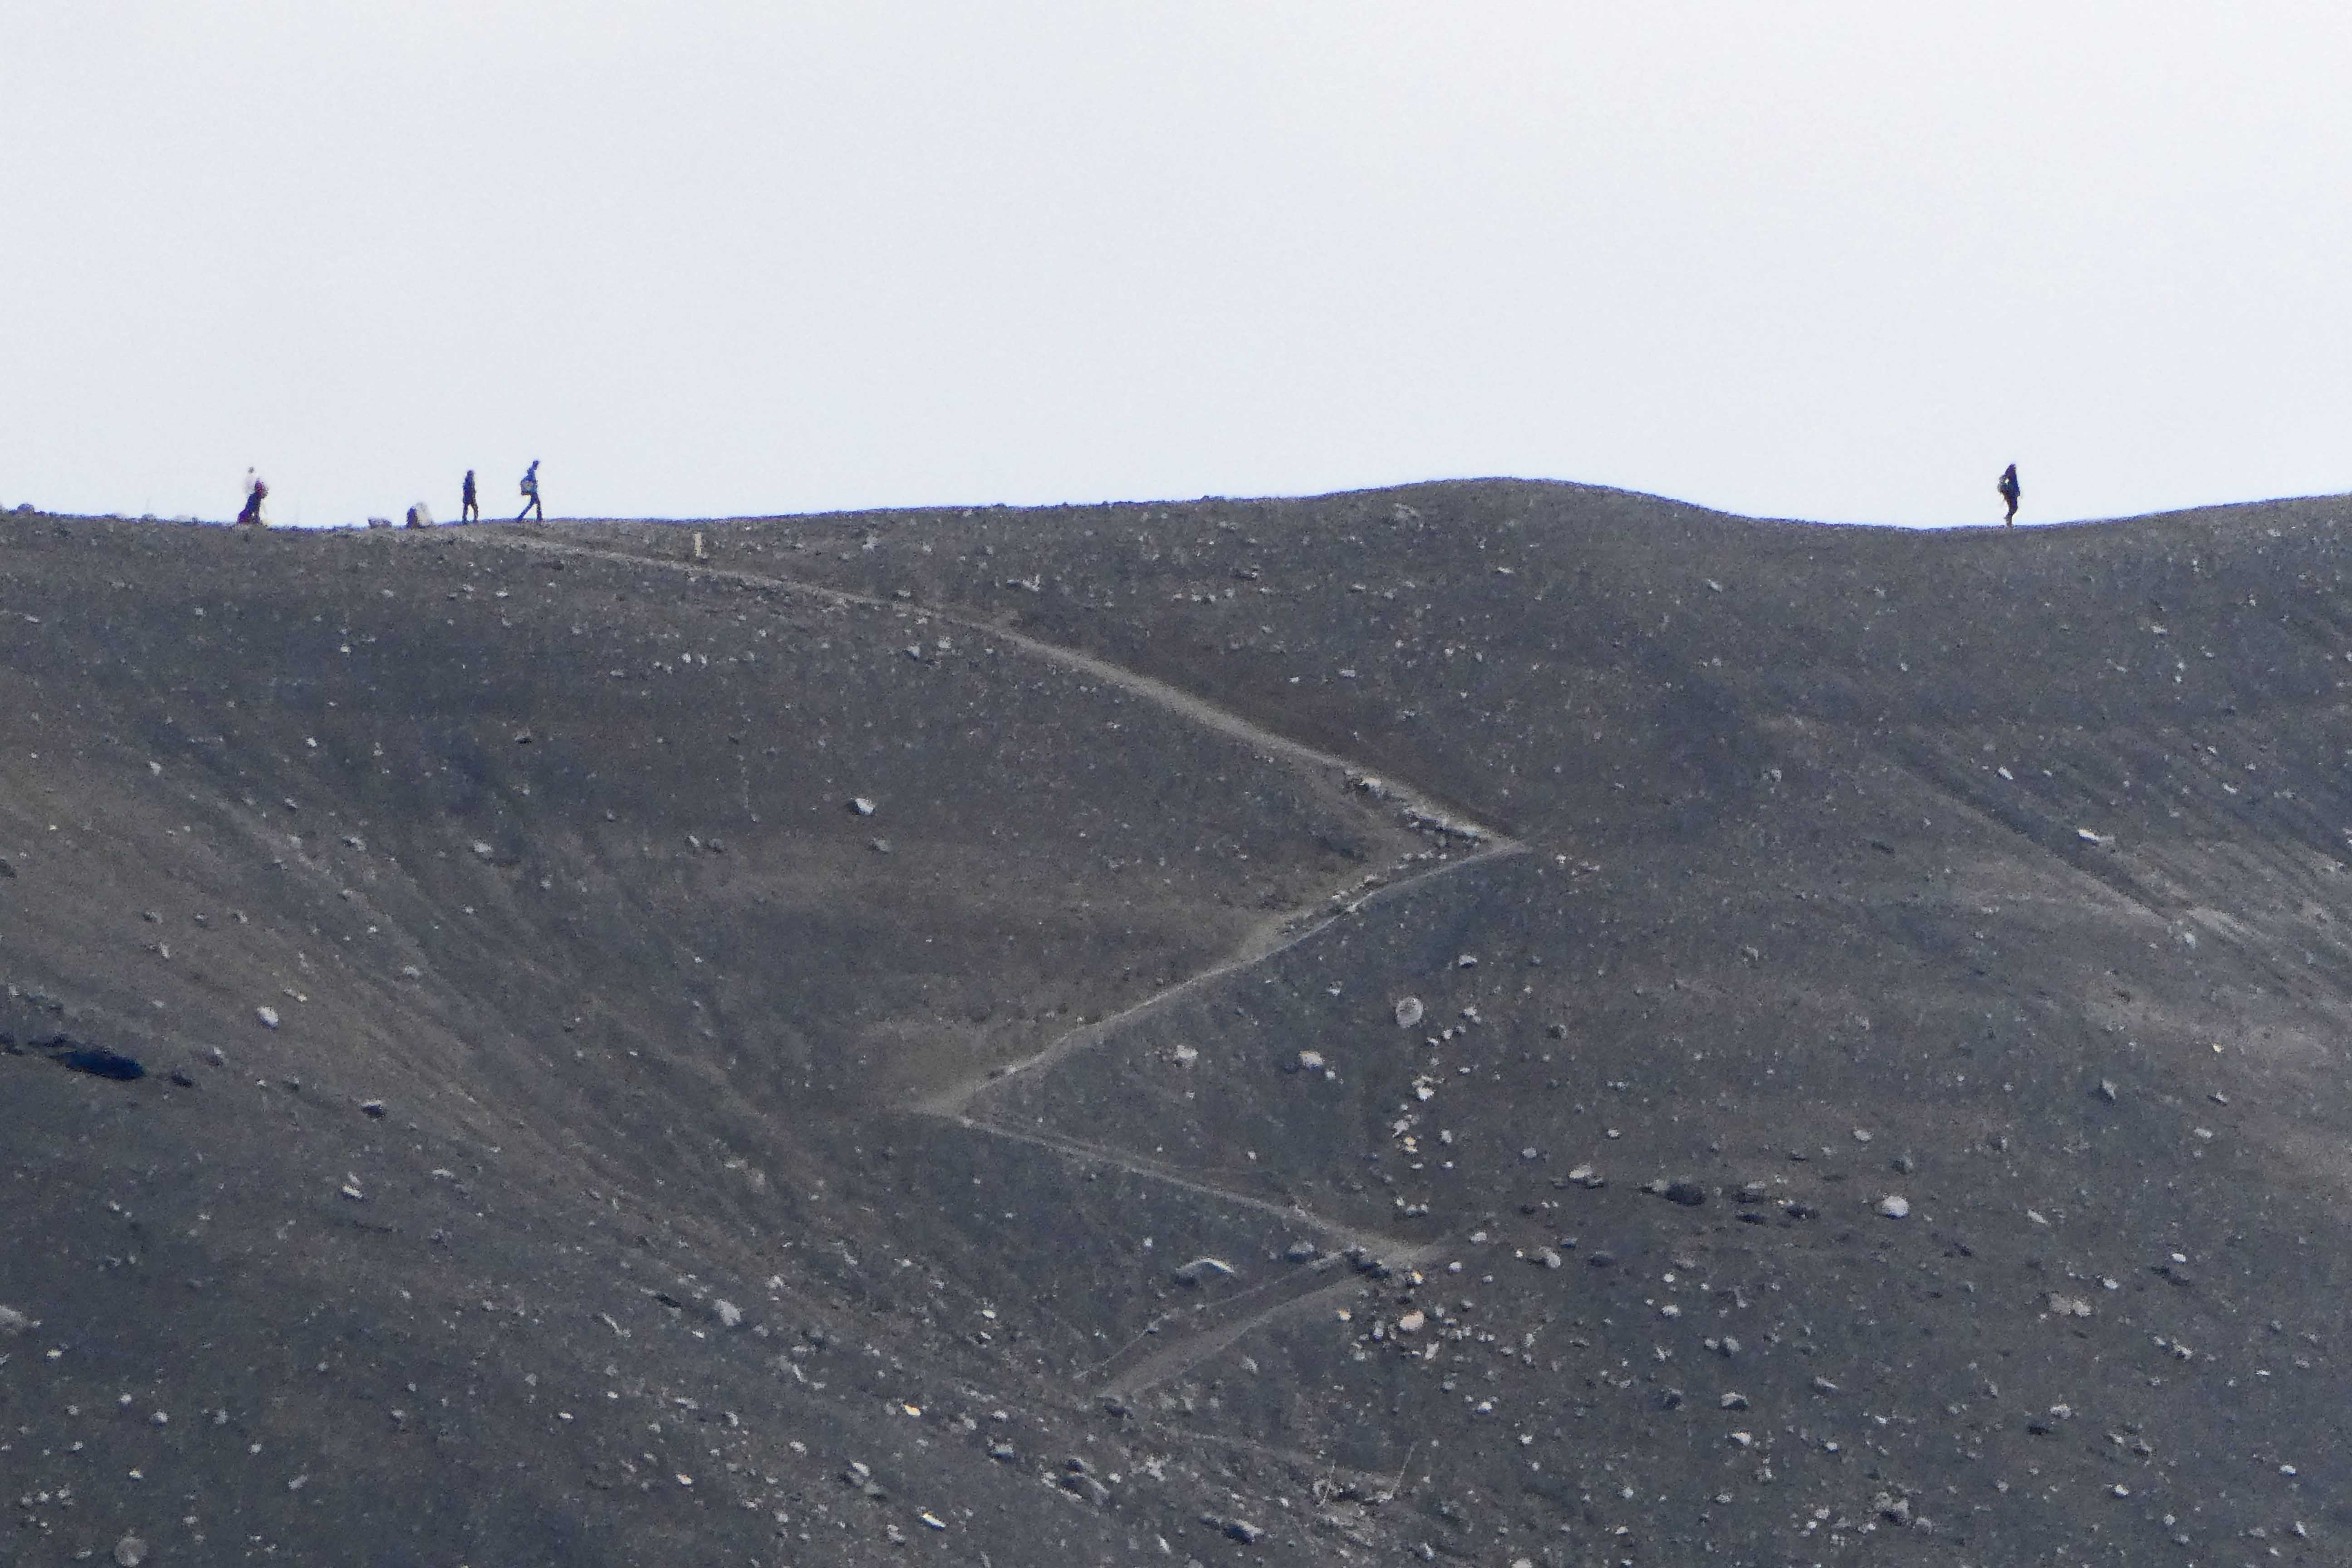 People hiking on the rim of Hverfjall, a crater from a volcano that erupted about 2600 years ago